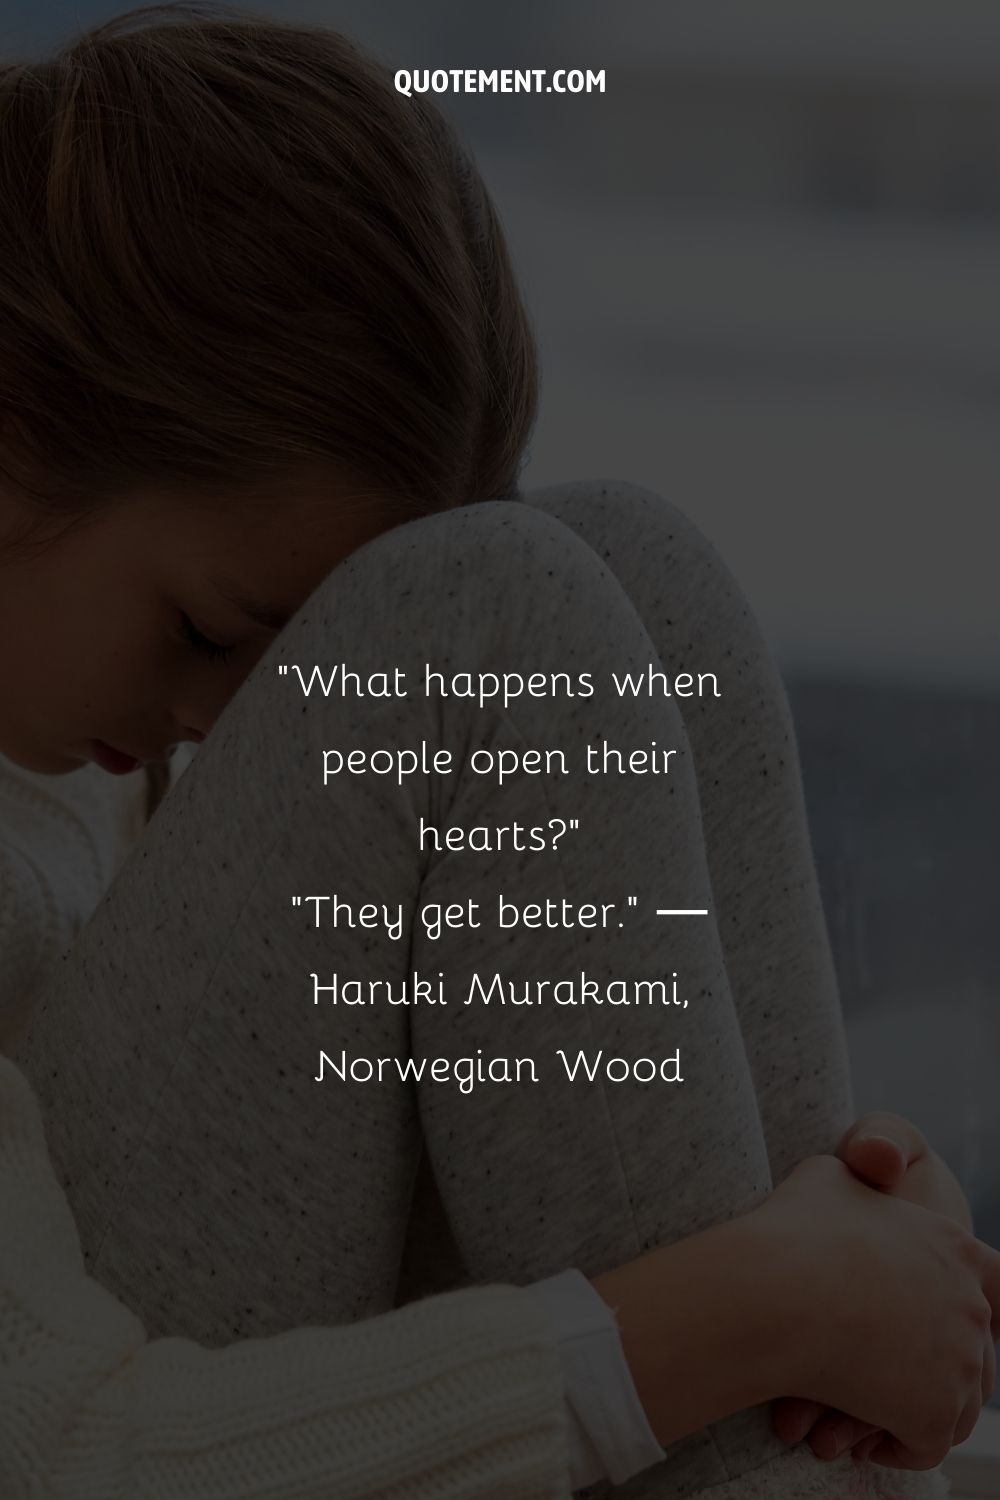 What happens when people open their hearts